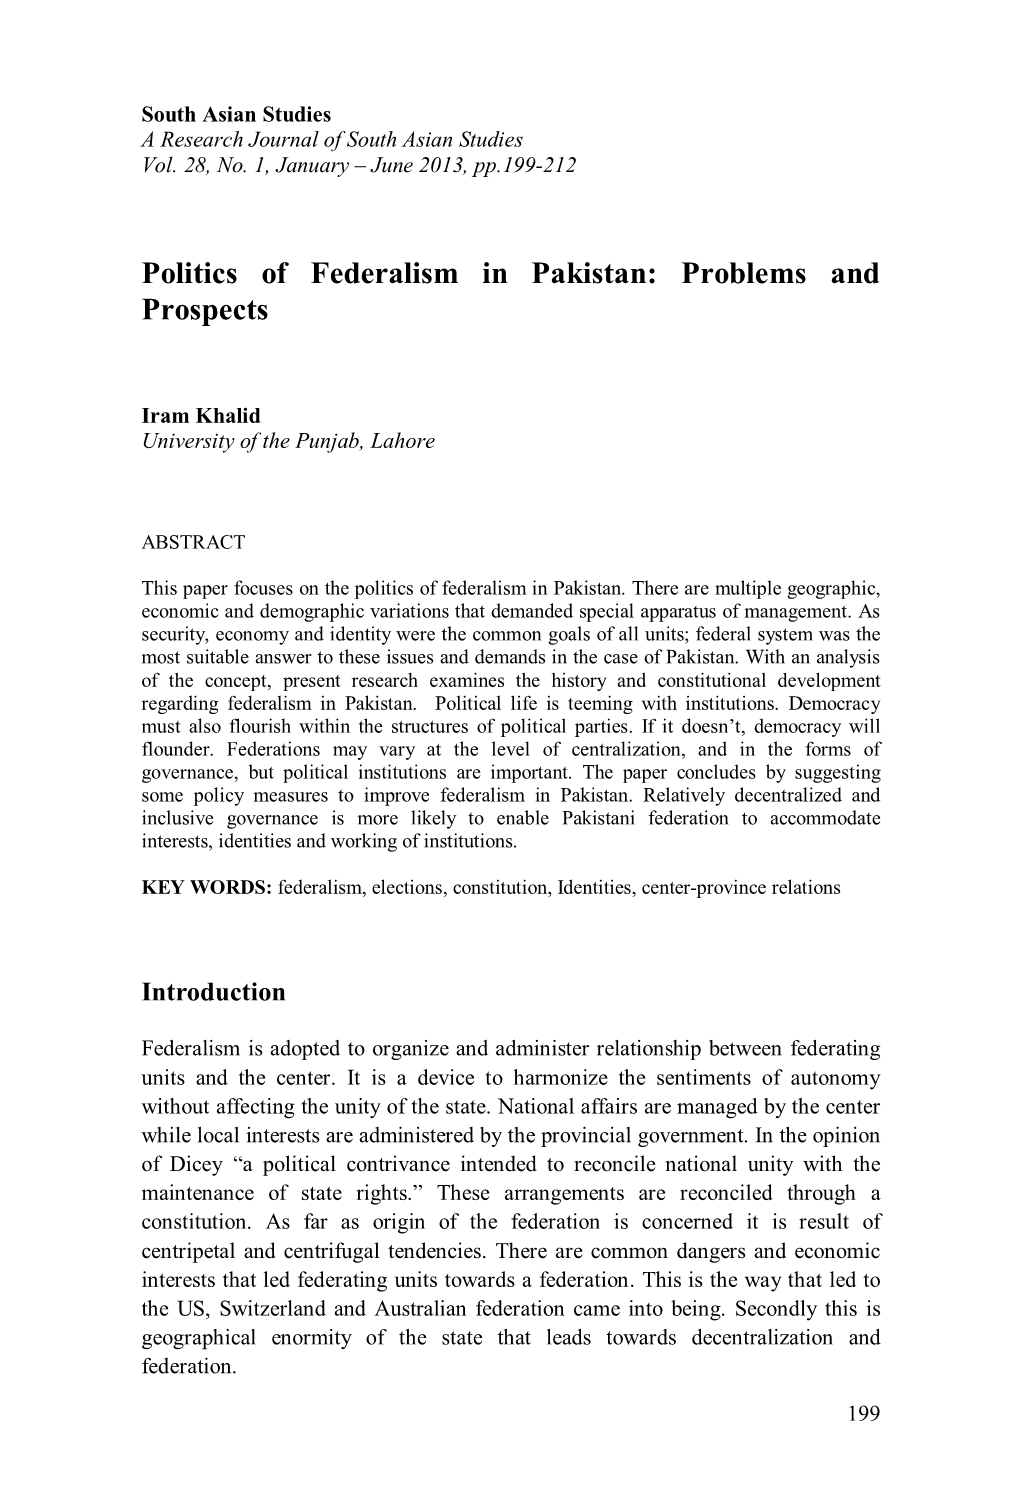 Politics of Federalism in Pakistan: Problems and Prospects